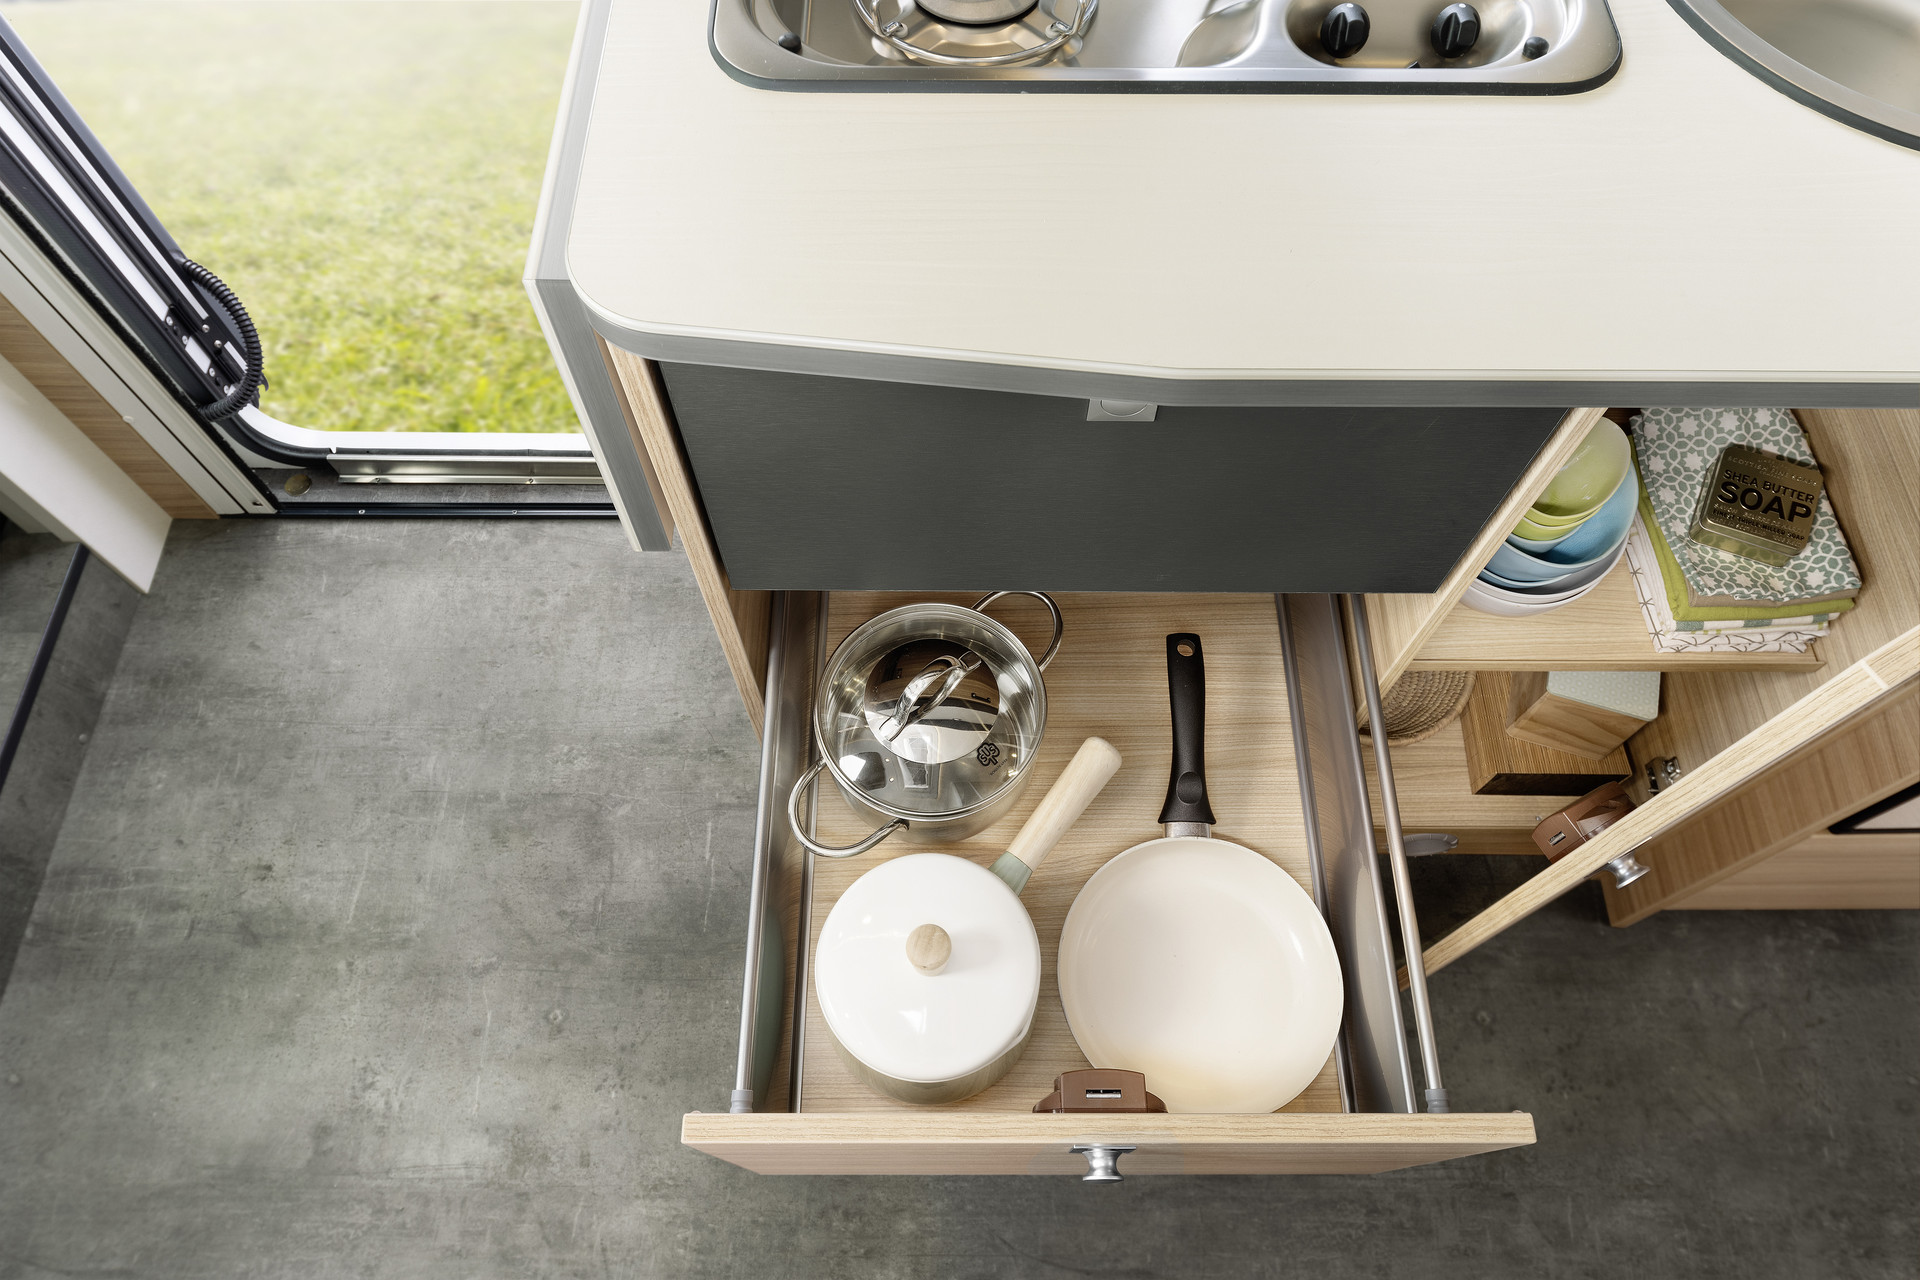 There is enough space in the drawers and the kitchen base cabinet for all your supplies and utensils. Your crockery also has a home in the overhead lockers. • I 6